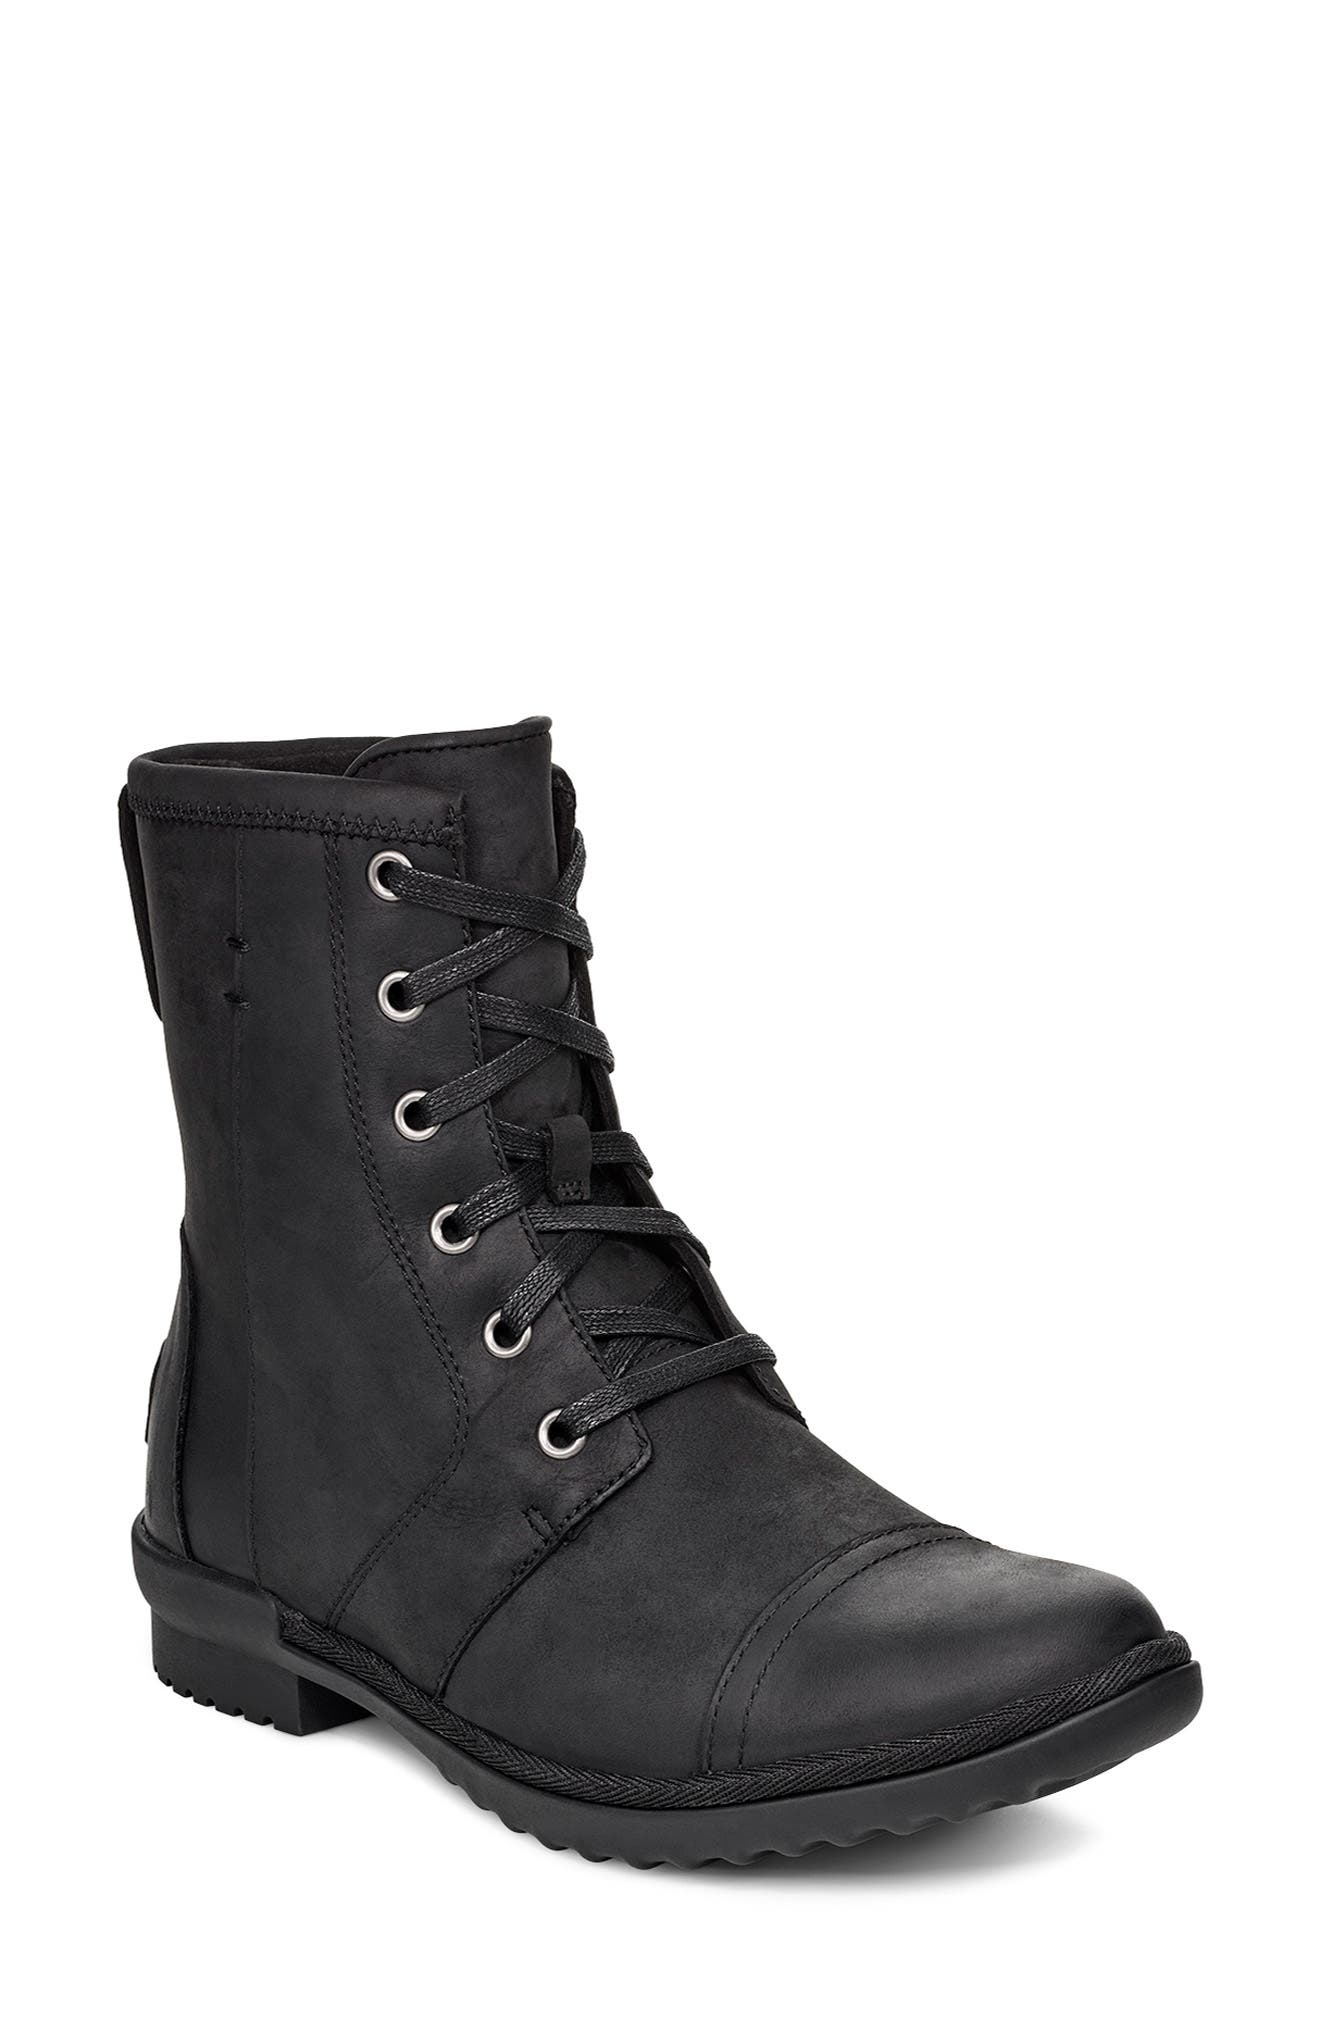 women's lace up uggs